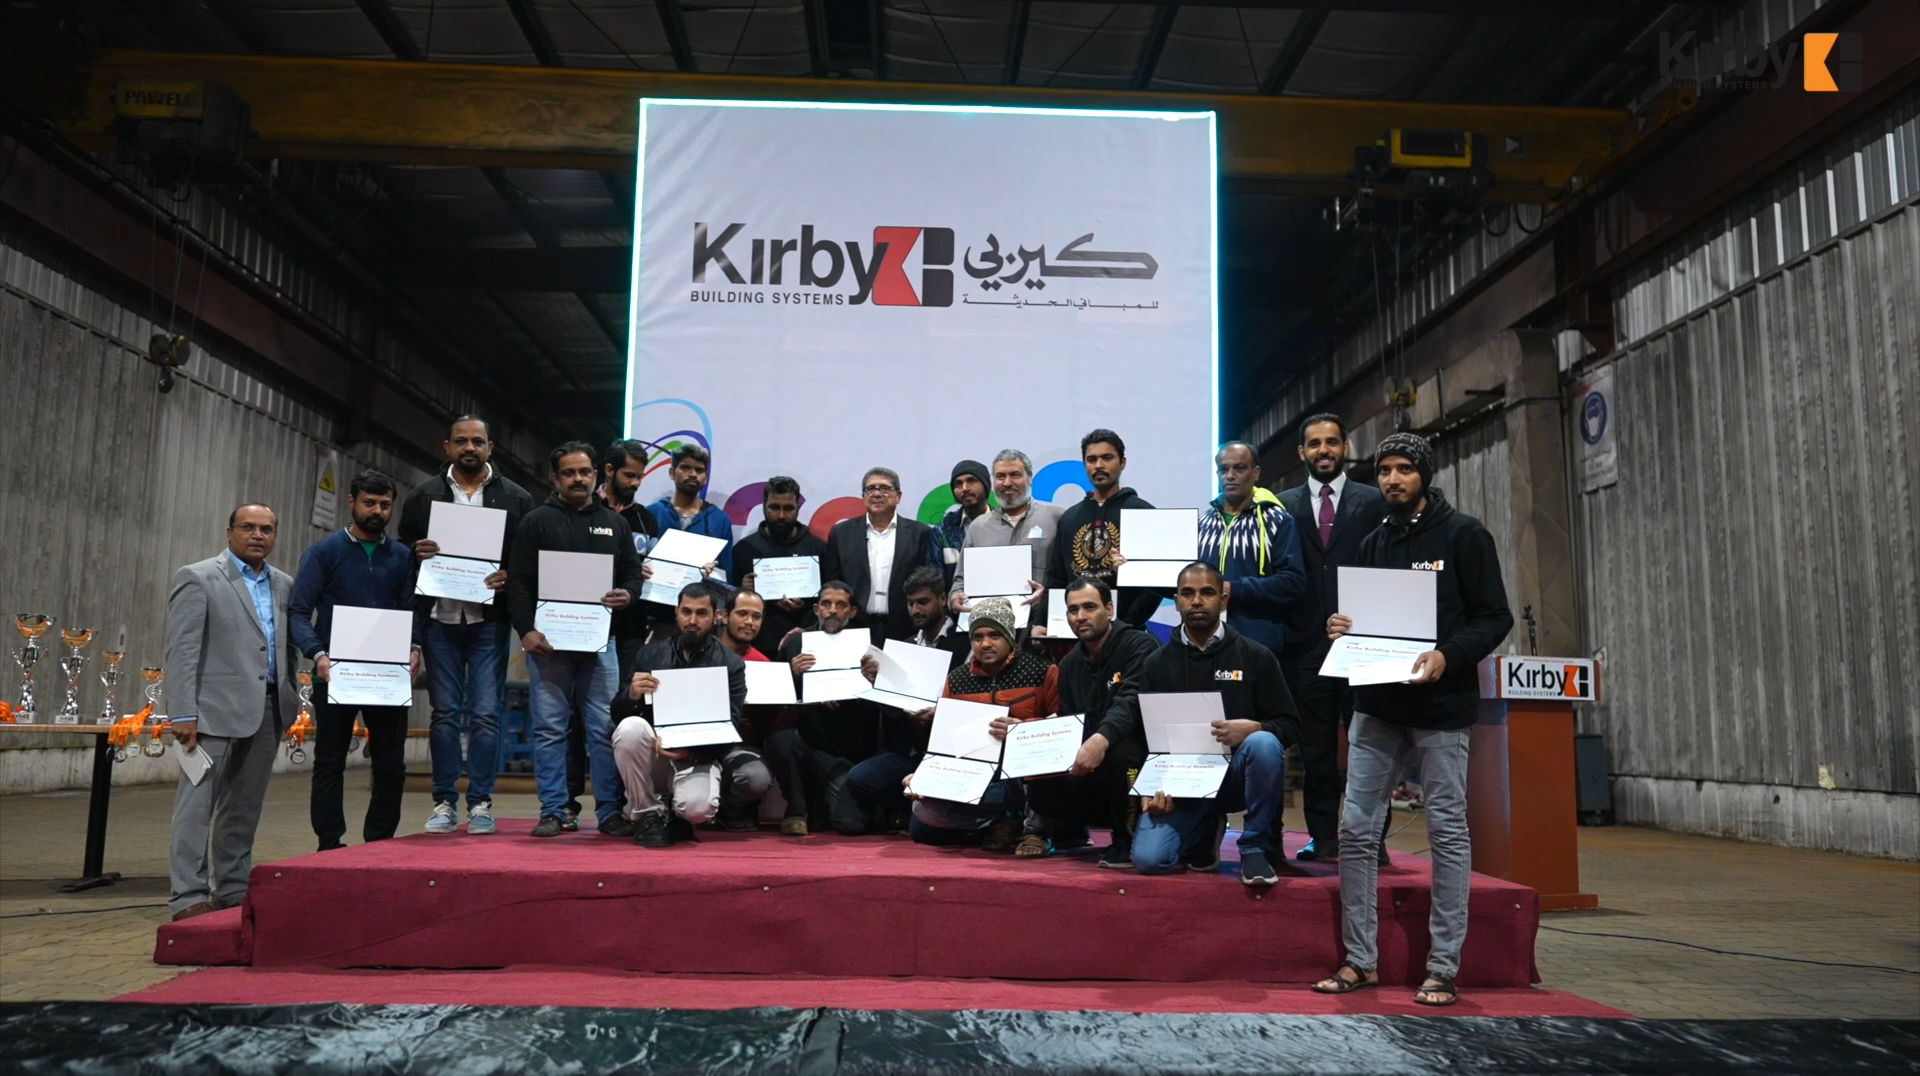 We are so excited to be - Kirby Construction Group